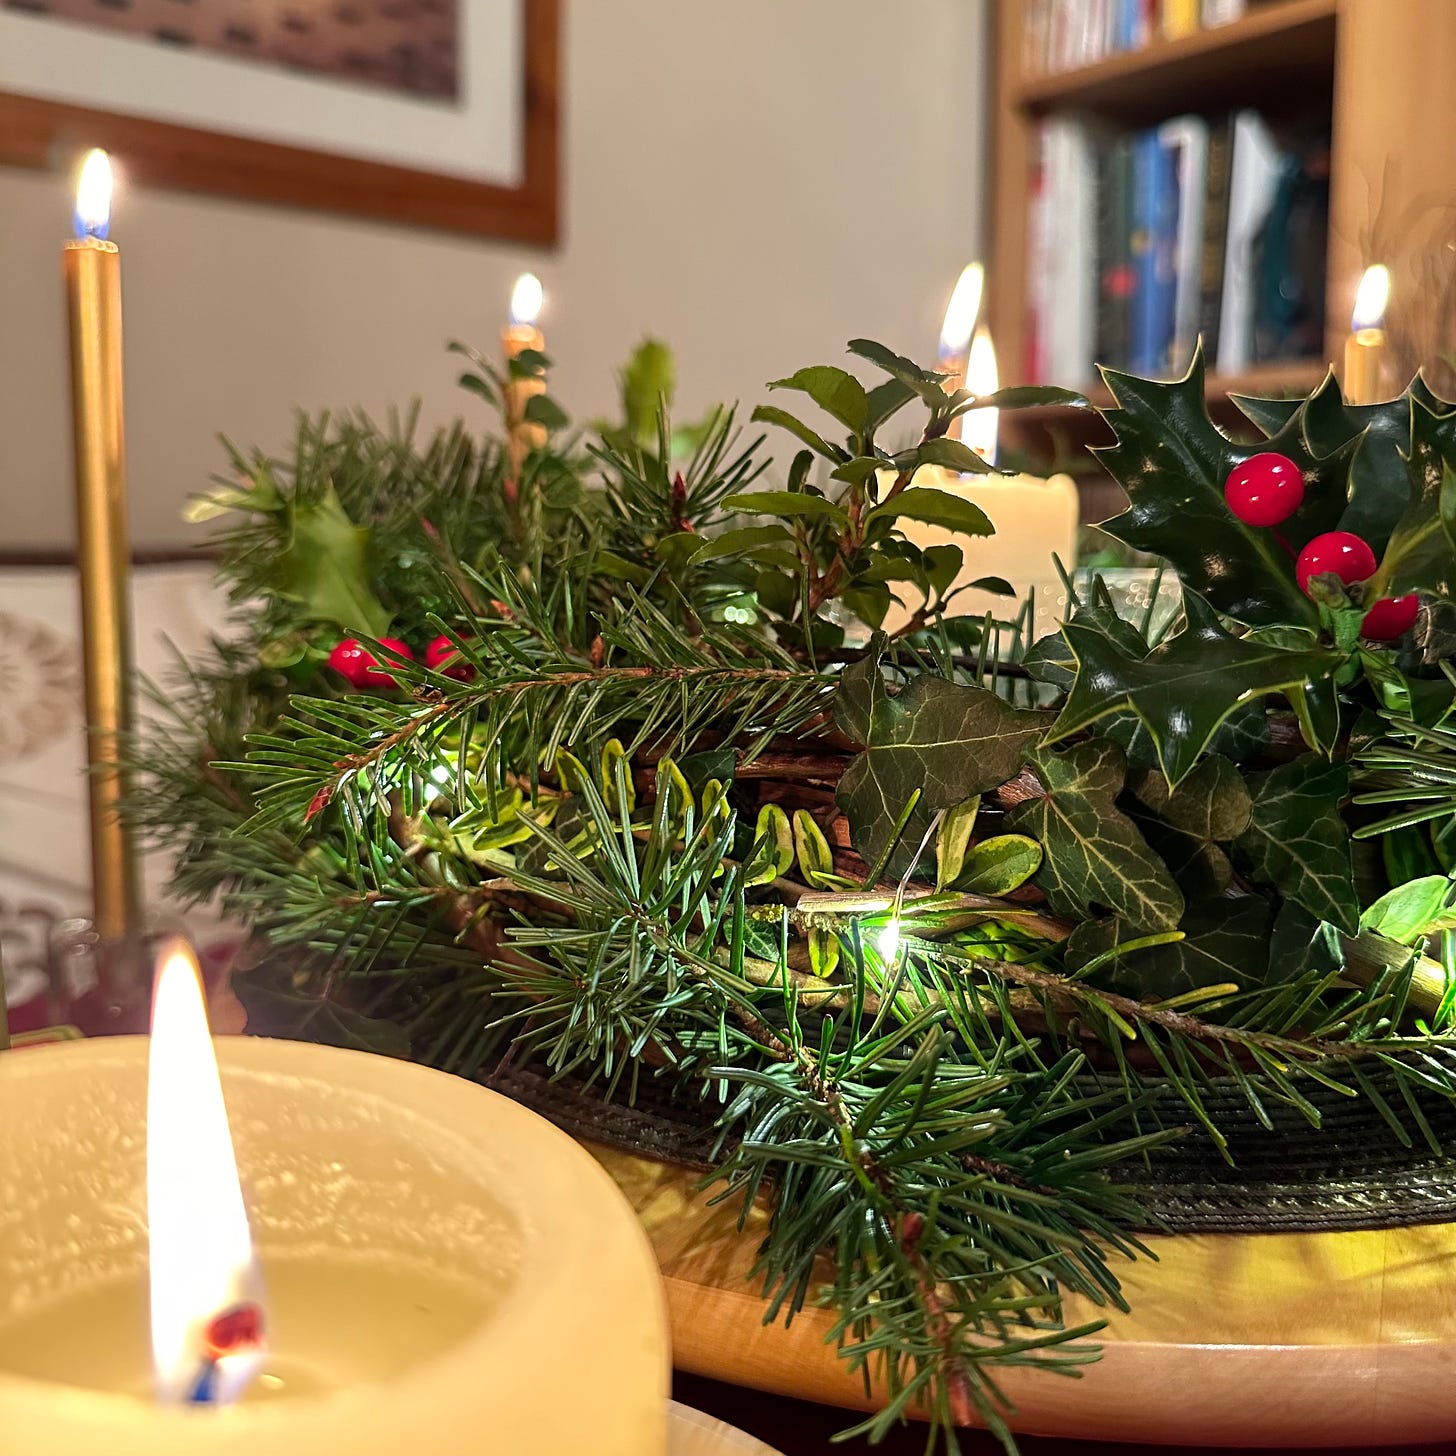 A table decoration made with garden foliage and lit by candles.